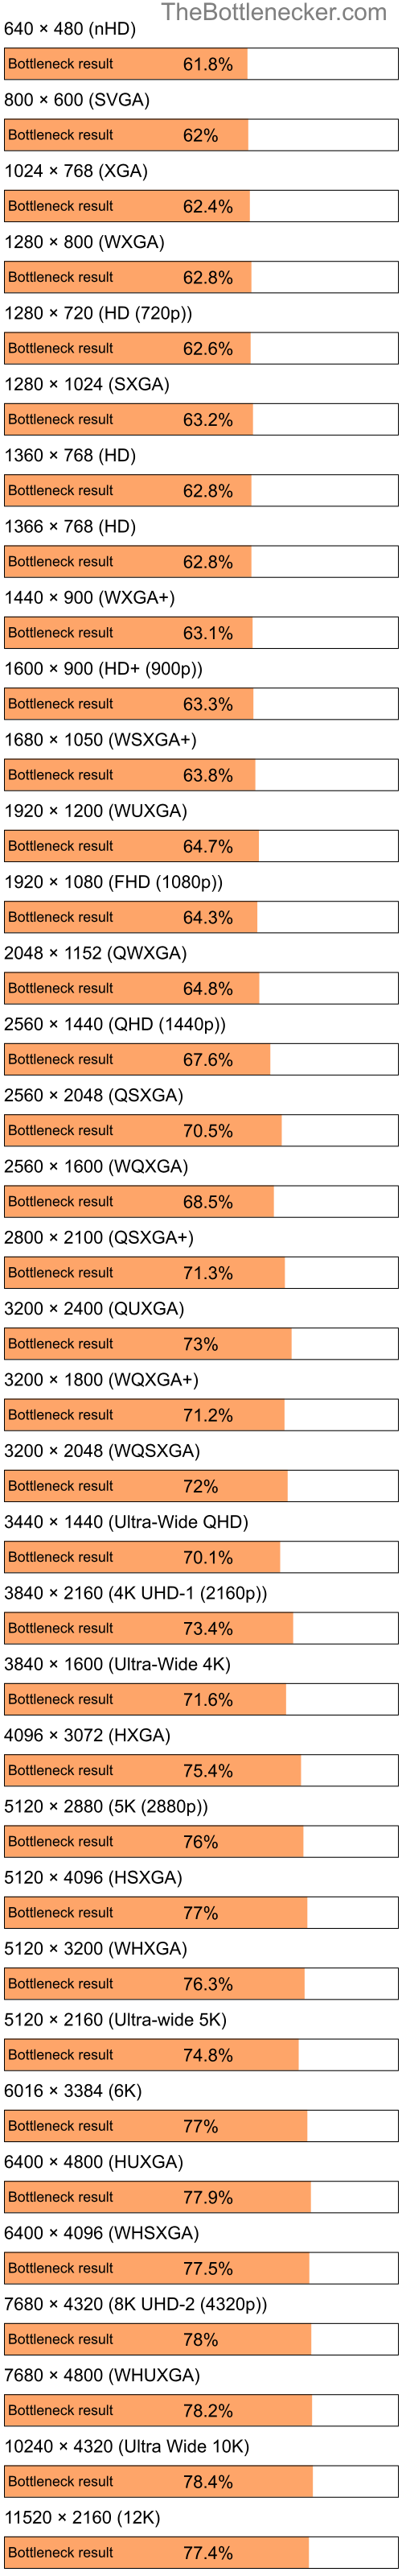 Bottleneck results by resolution for Intel Pentium 4 and AMD Radeon X800GT in General Tasks